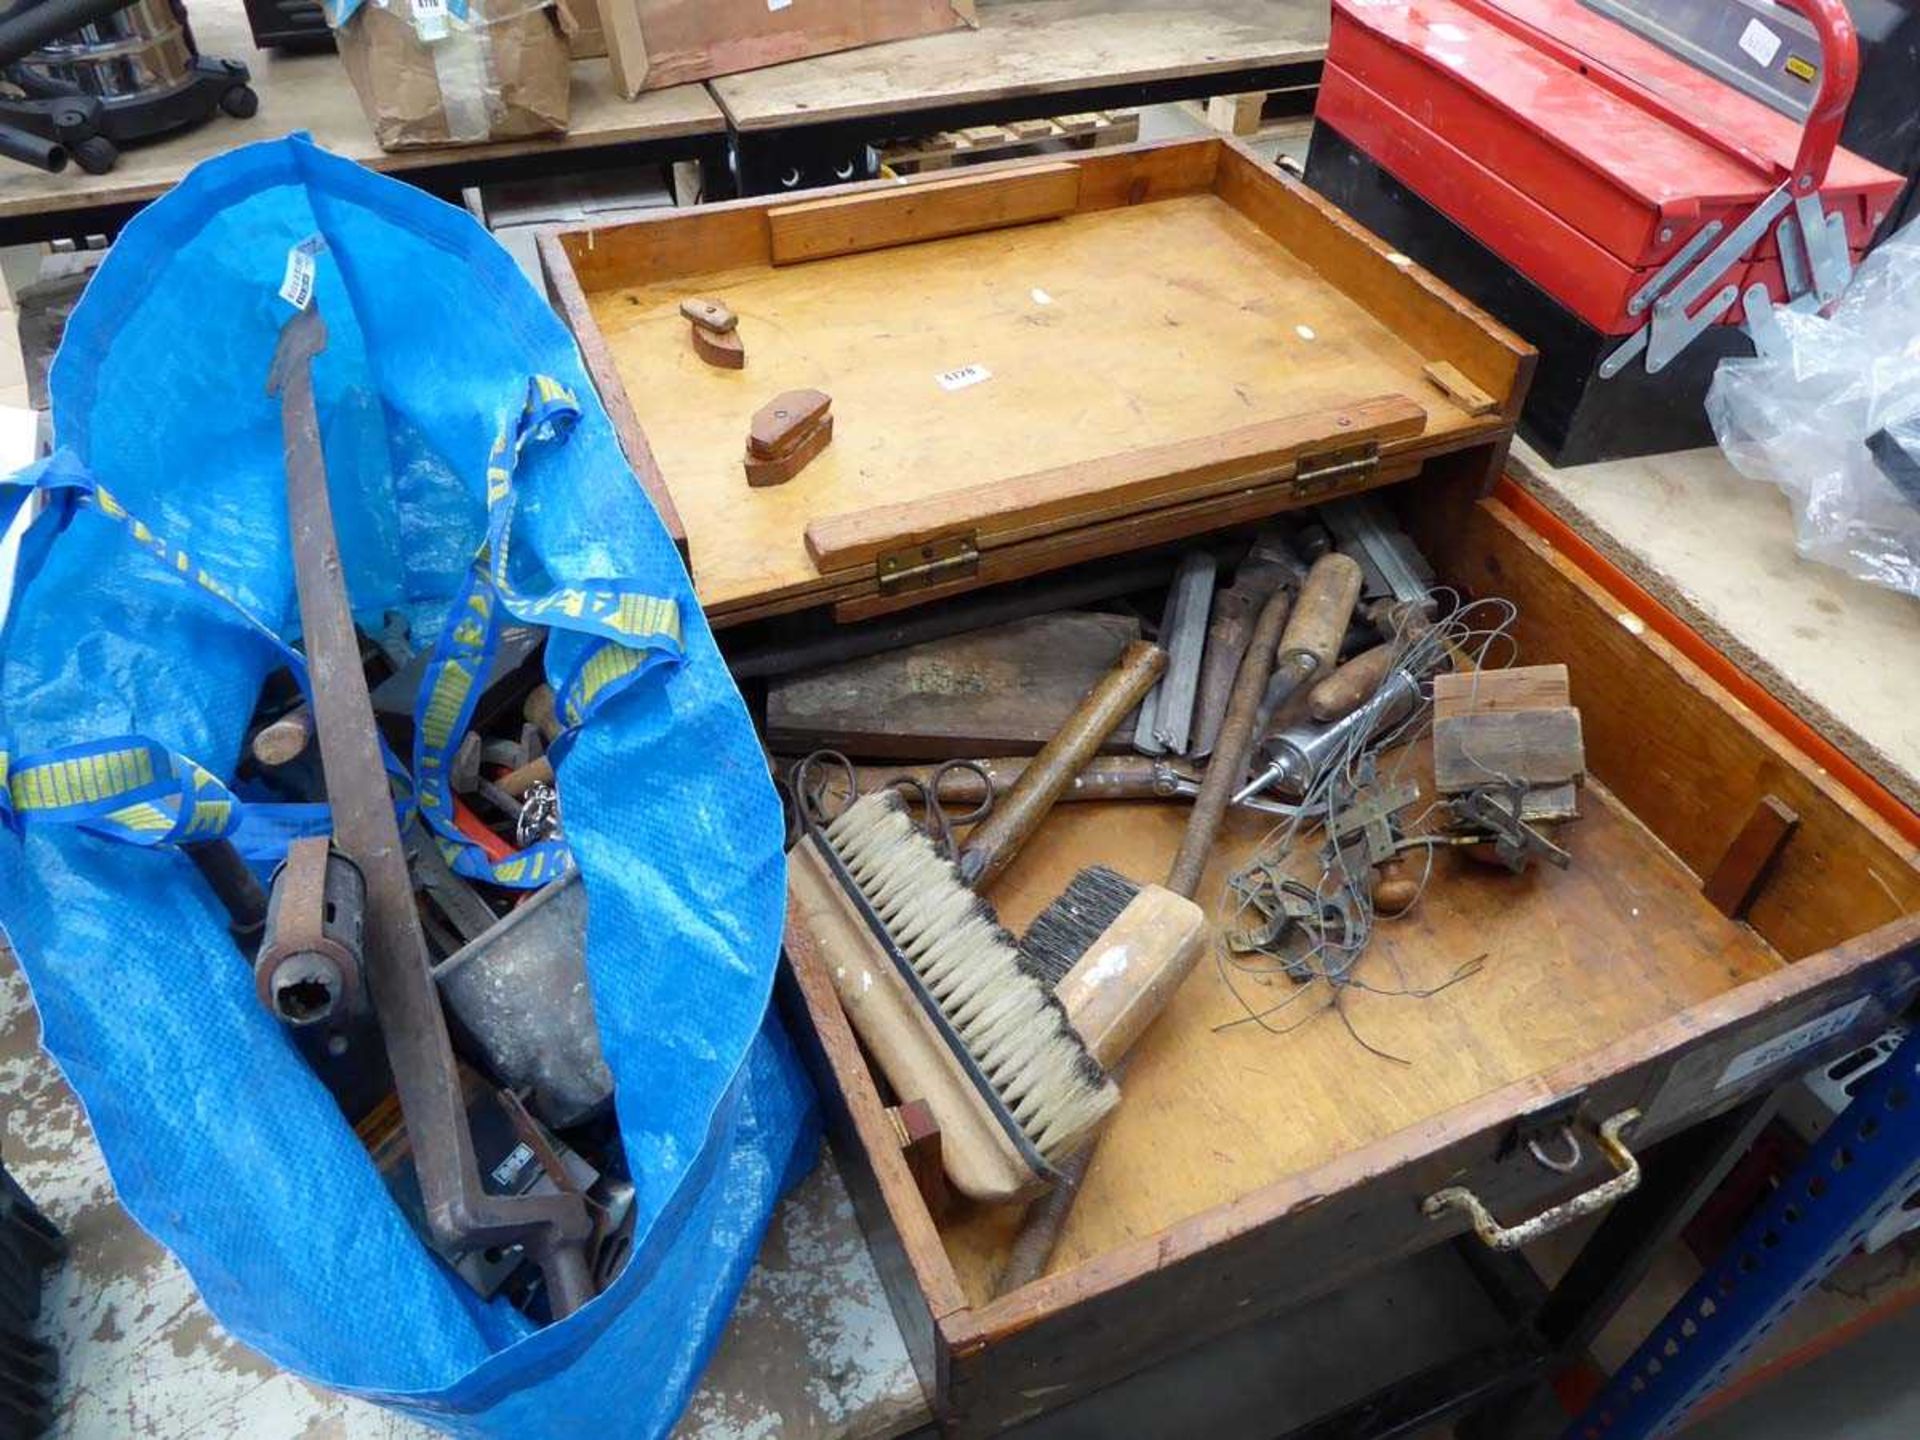 Large wooden toolbox of various tools, and large blue bag of assorted tools